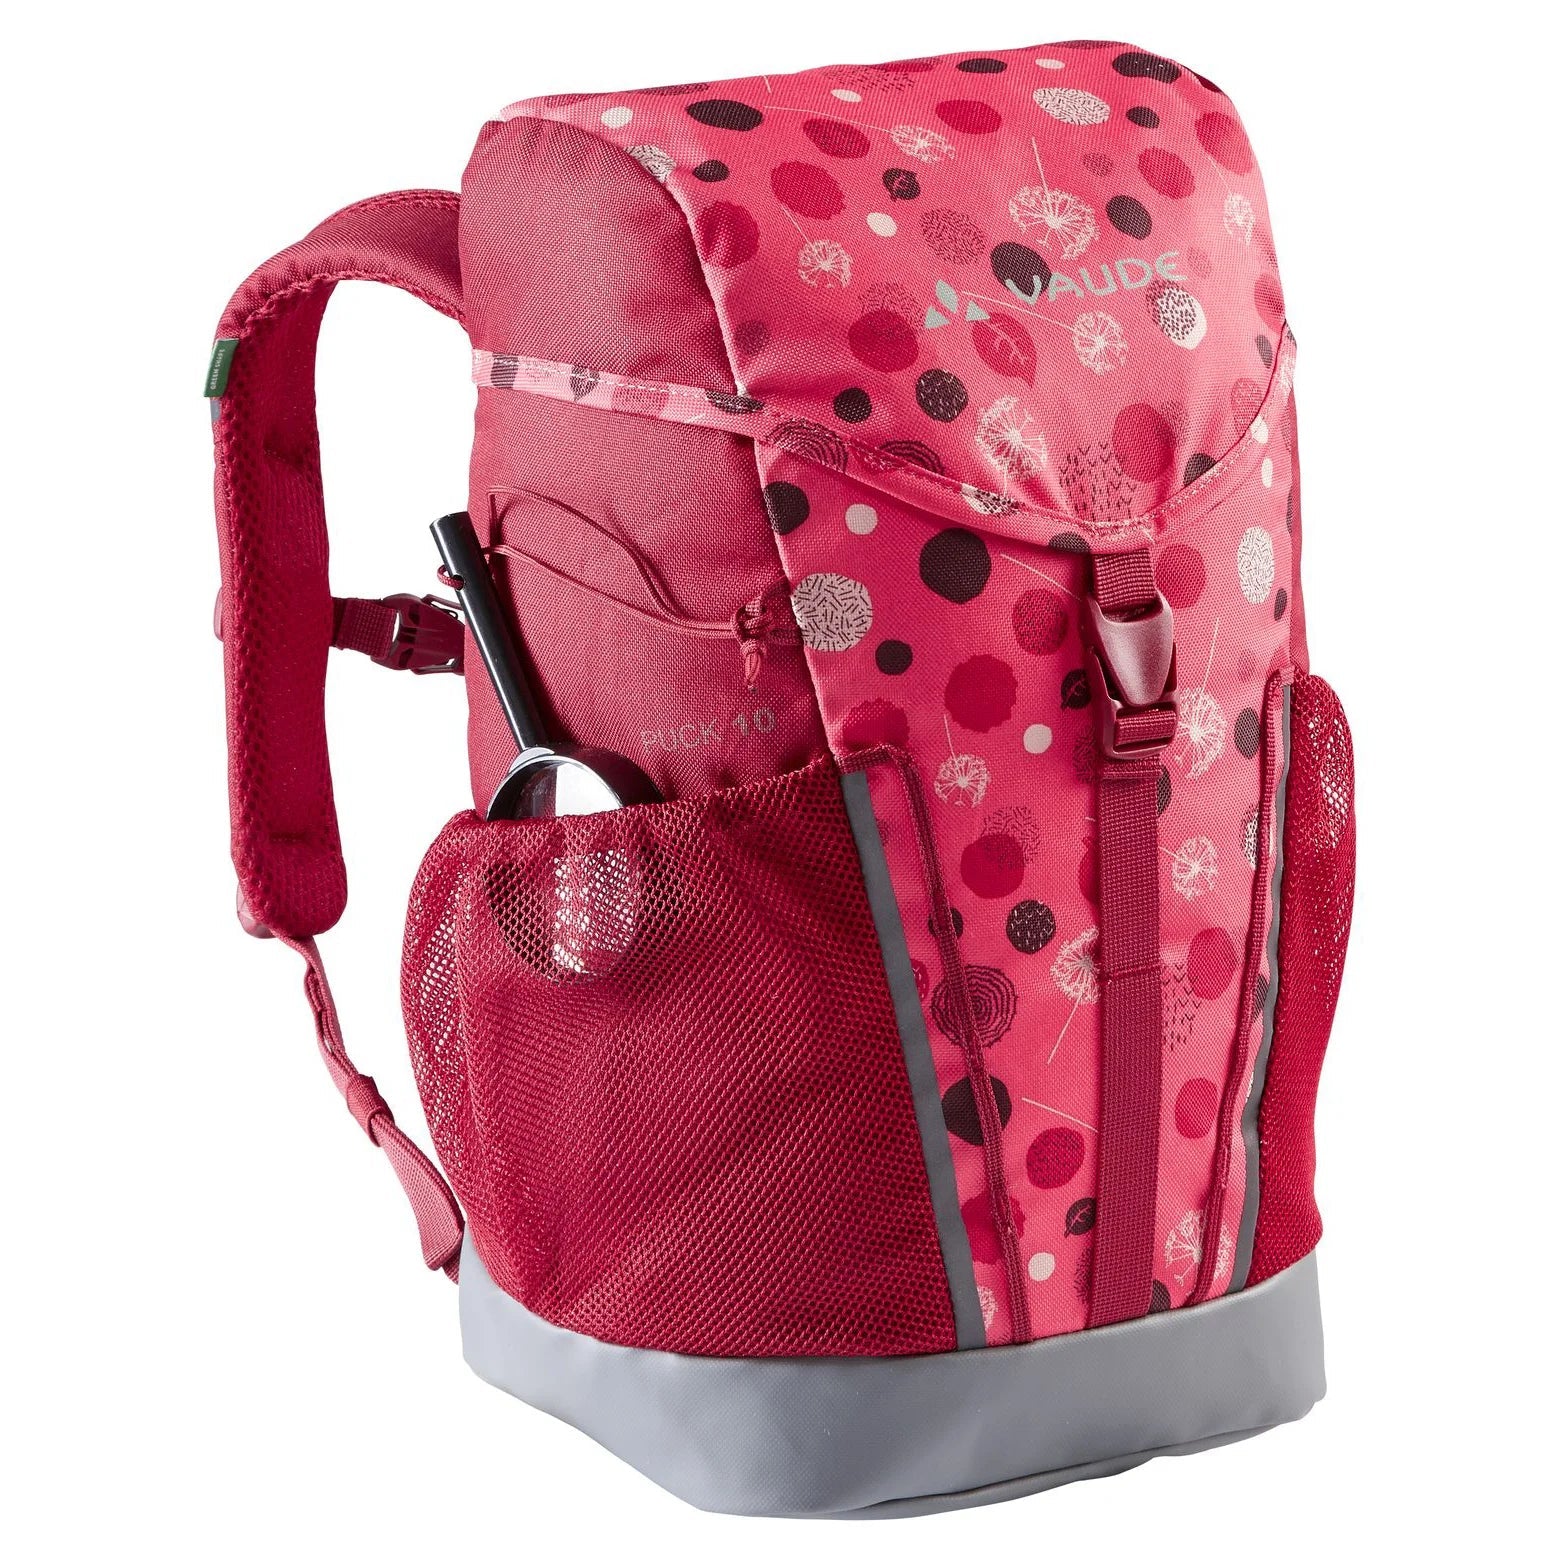 Vaude Family Puck 10 children's backpack 38 cm - bright pink-cranberry